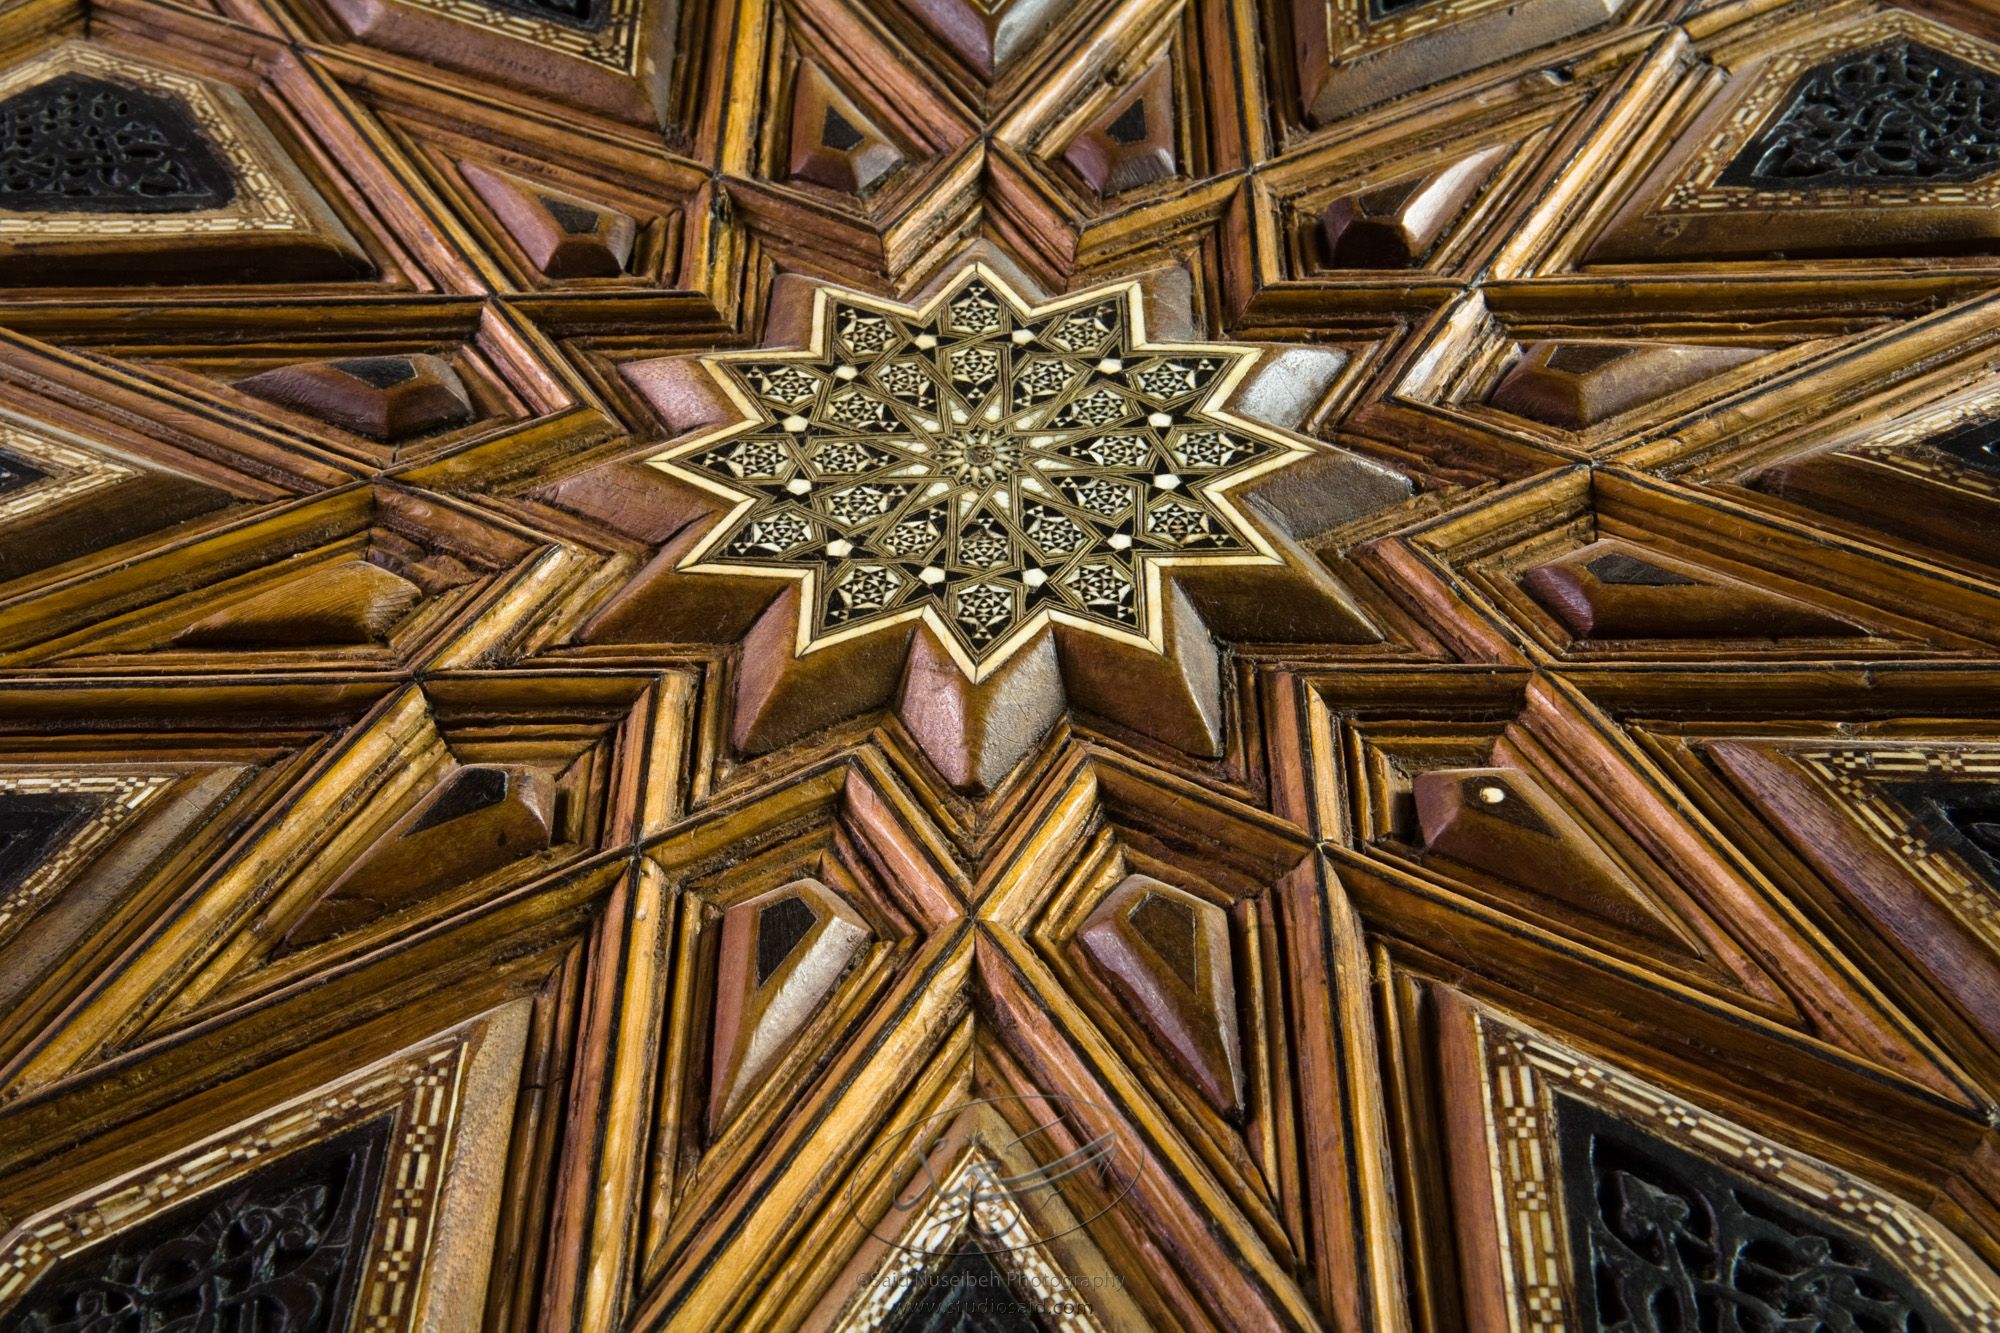 "Twelve-sided stars. Minbar, Carved Woodwork and Inlay Detail"The late-13th / early-14th c. Mamluk minbar, or pulpit, of Sultan al-Nasir Muhammad, the ninth Mamluk Sultan from Cairo and son of Qalawun. The minbar was located in the Umayyad Mosque in Aleppo, Haleb, prior to its damage and disappearance in May 2013.